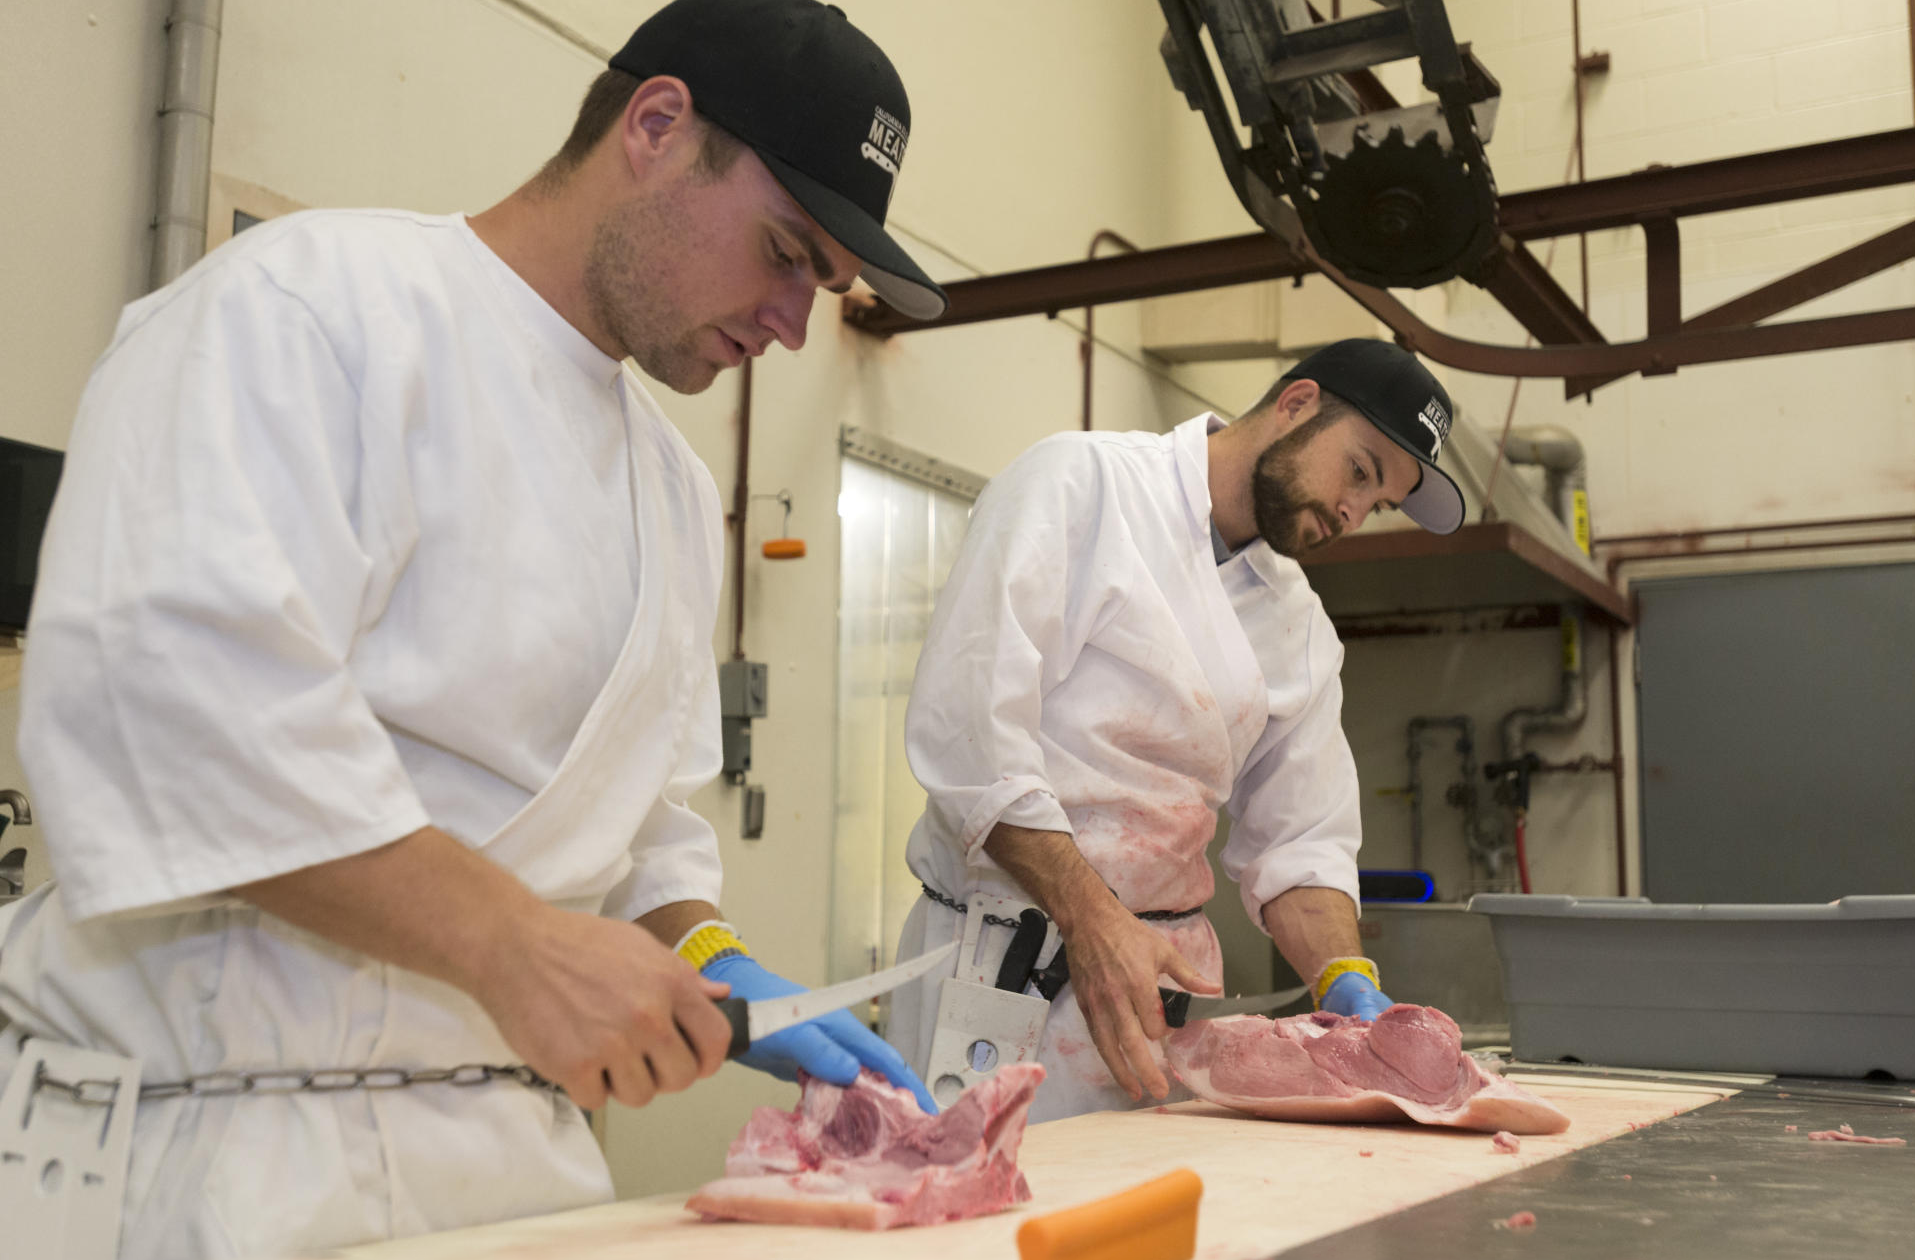 Two people butcher meat at the Meats Lab